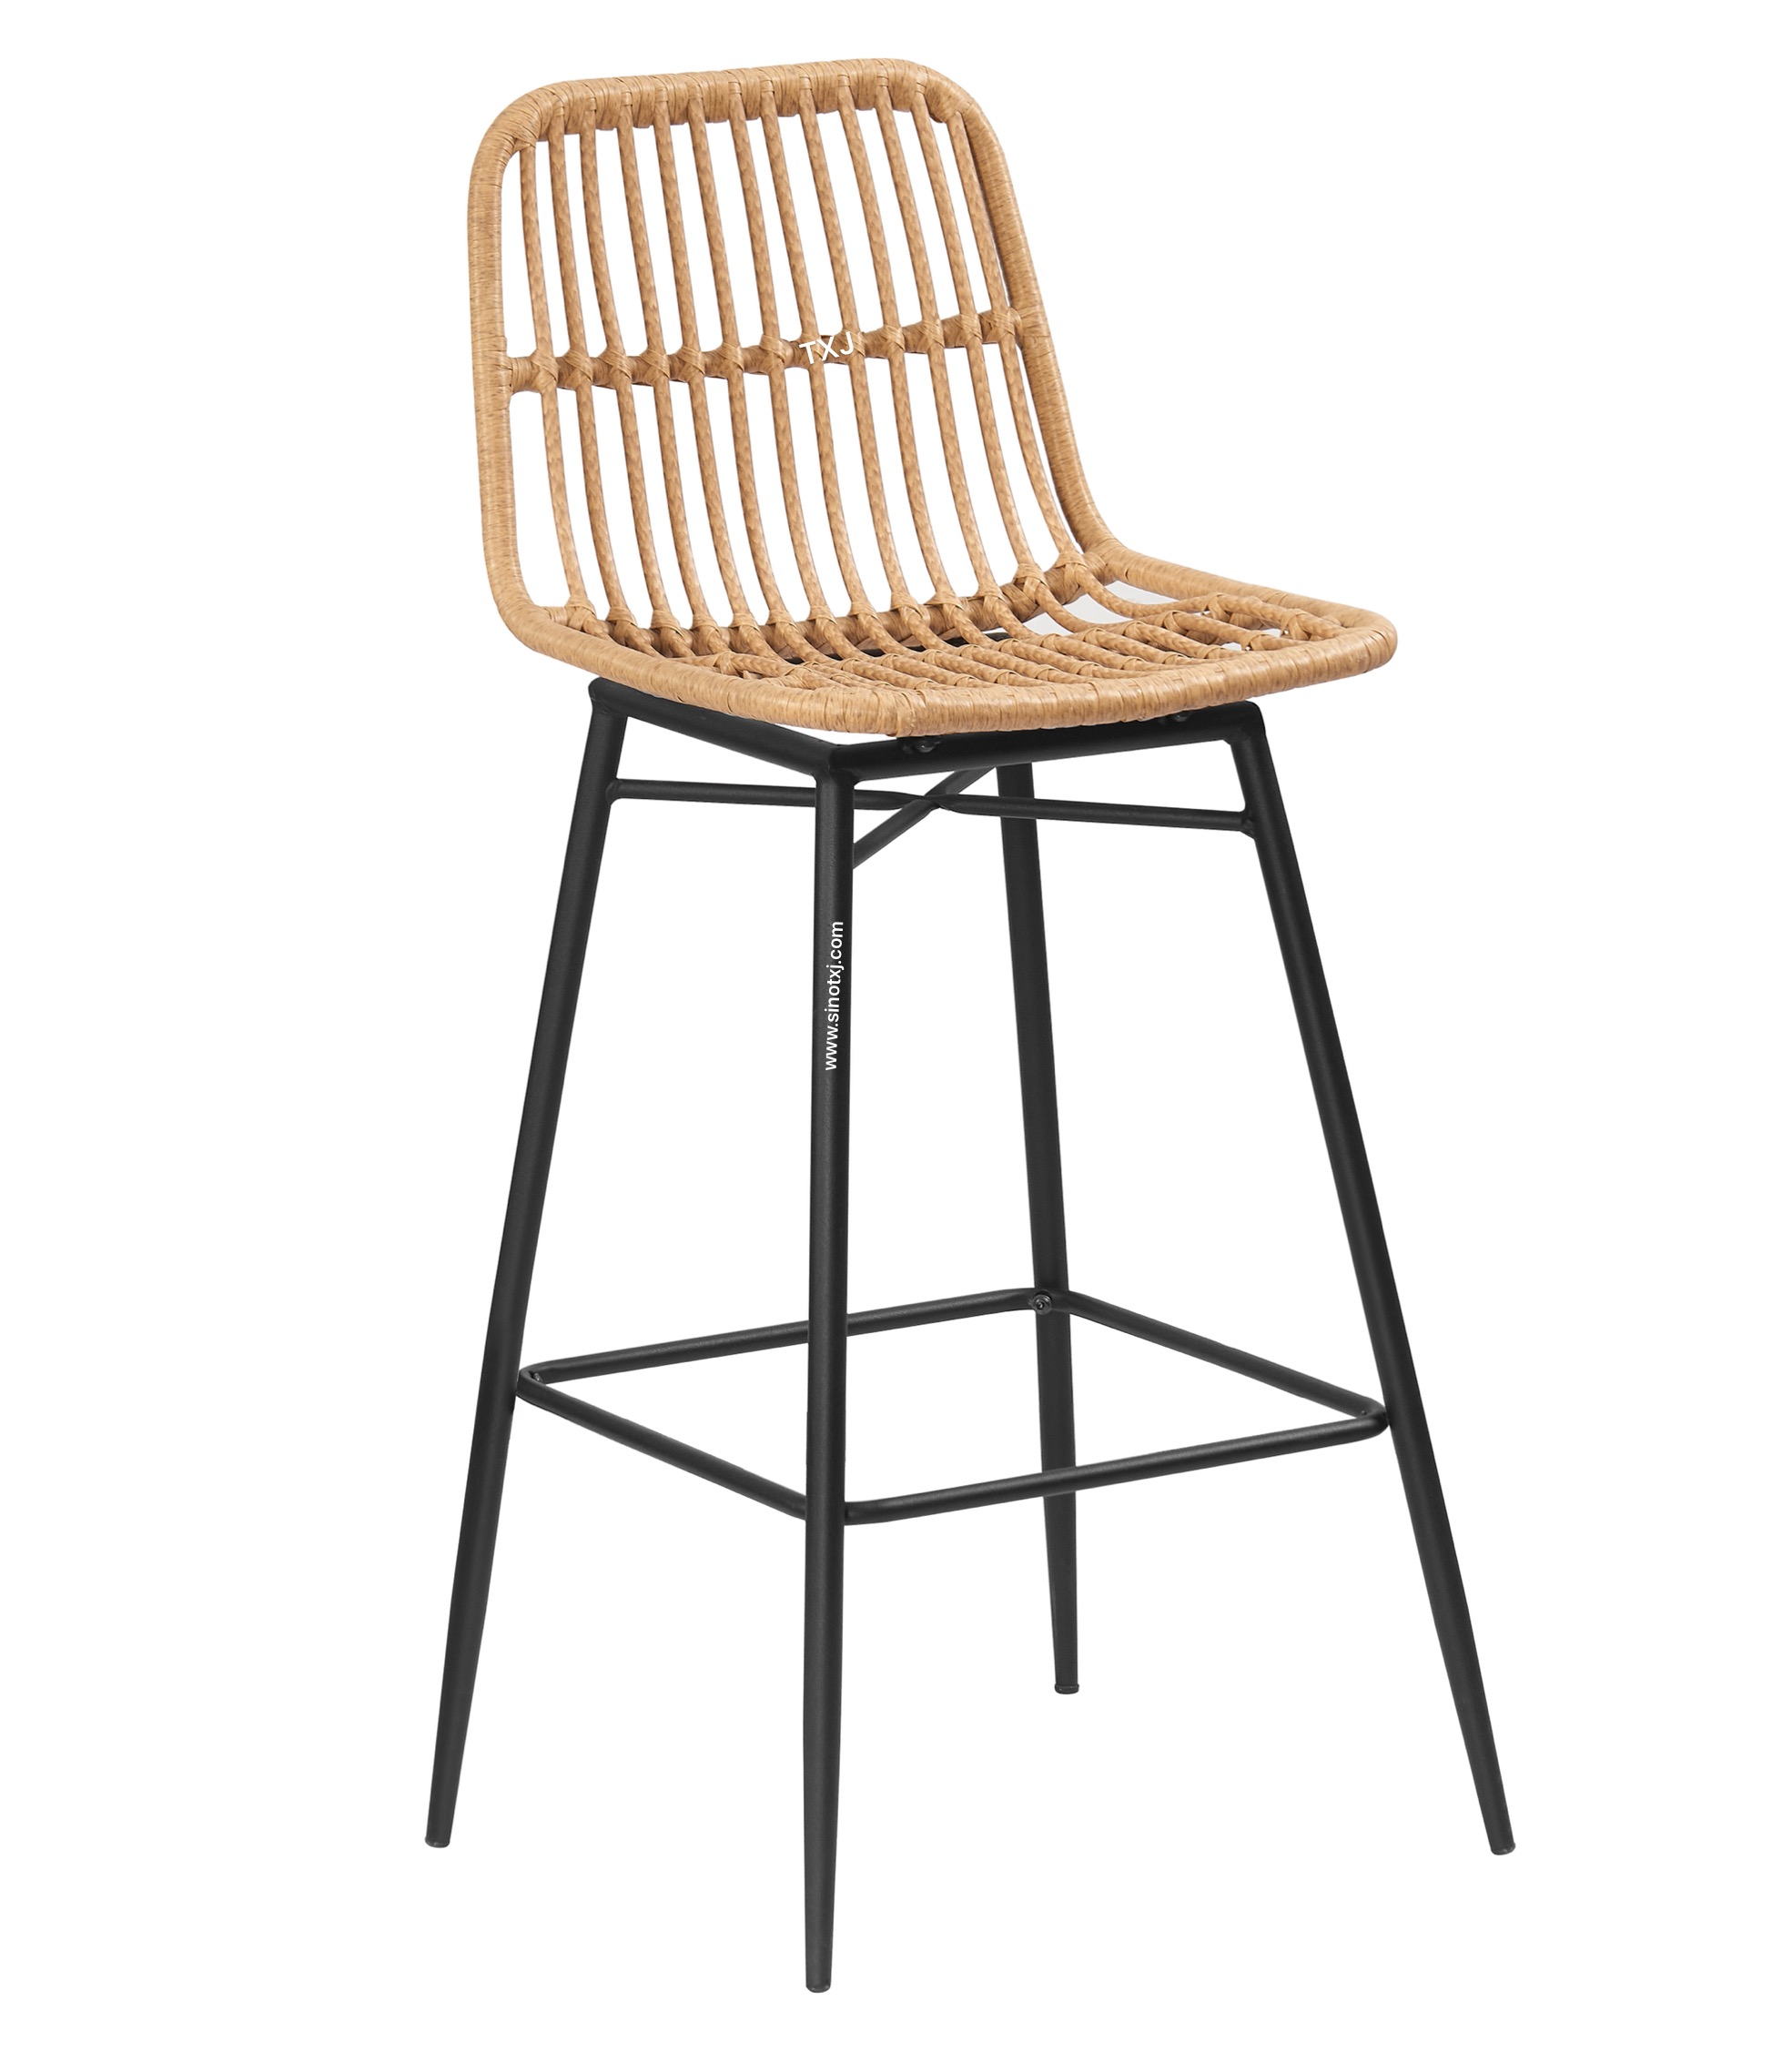 Morden furniture Barstool for kitchen BS-1988 Featured Image